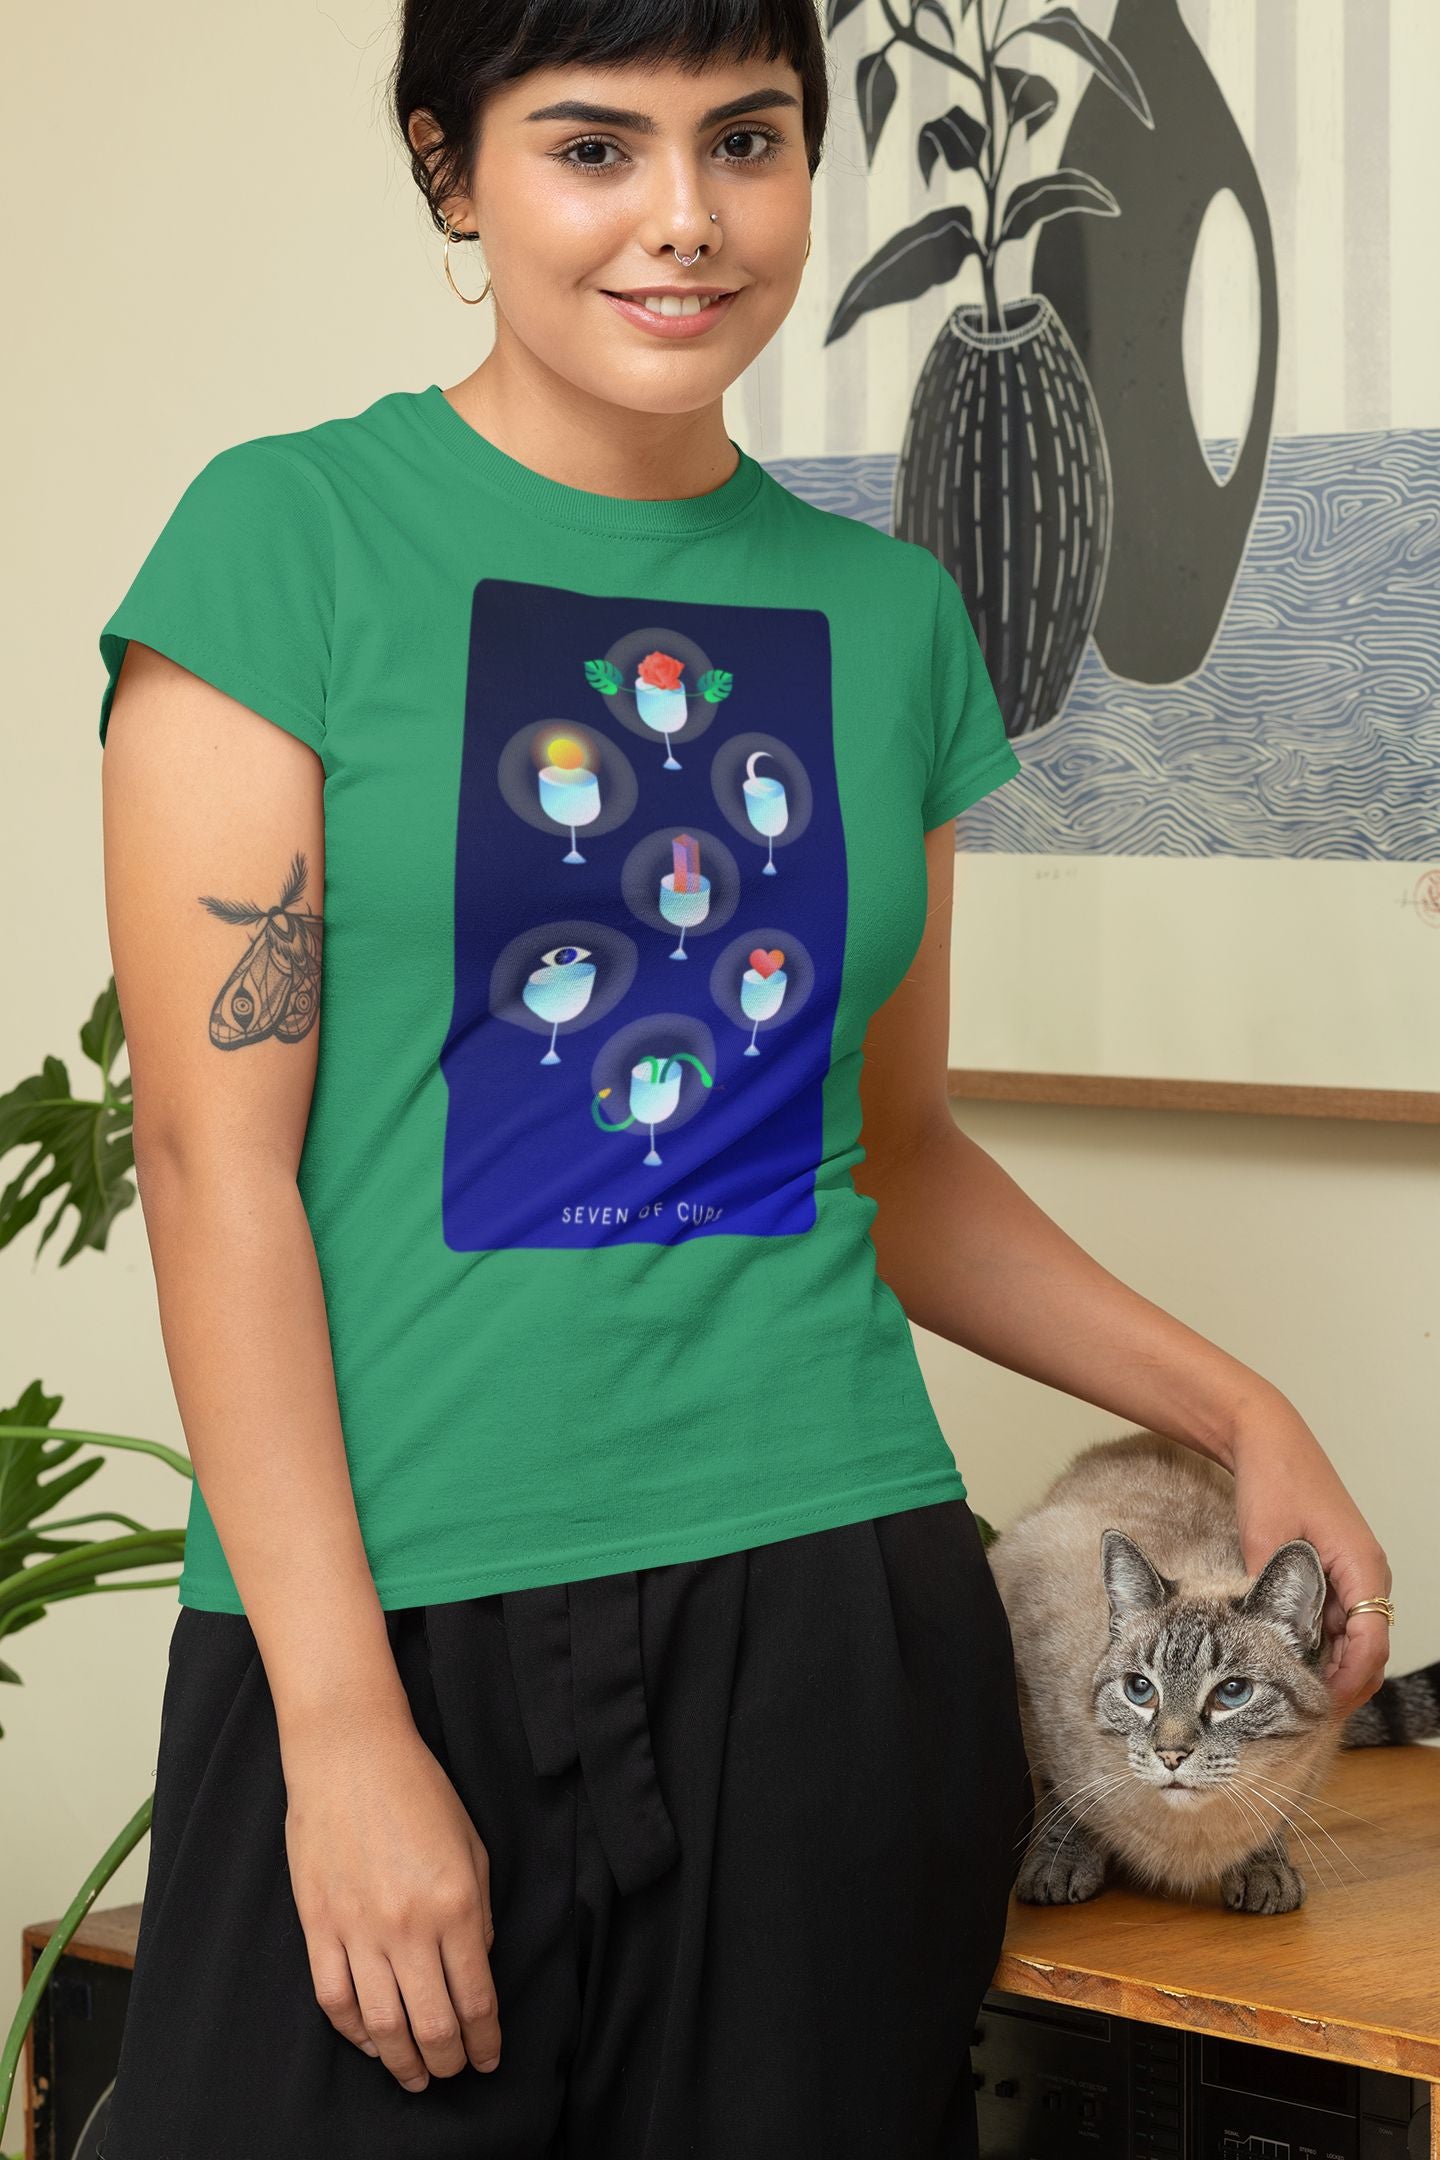 Seven of Cups T-shirt